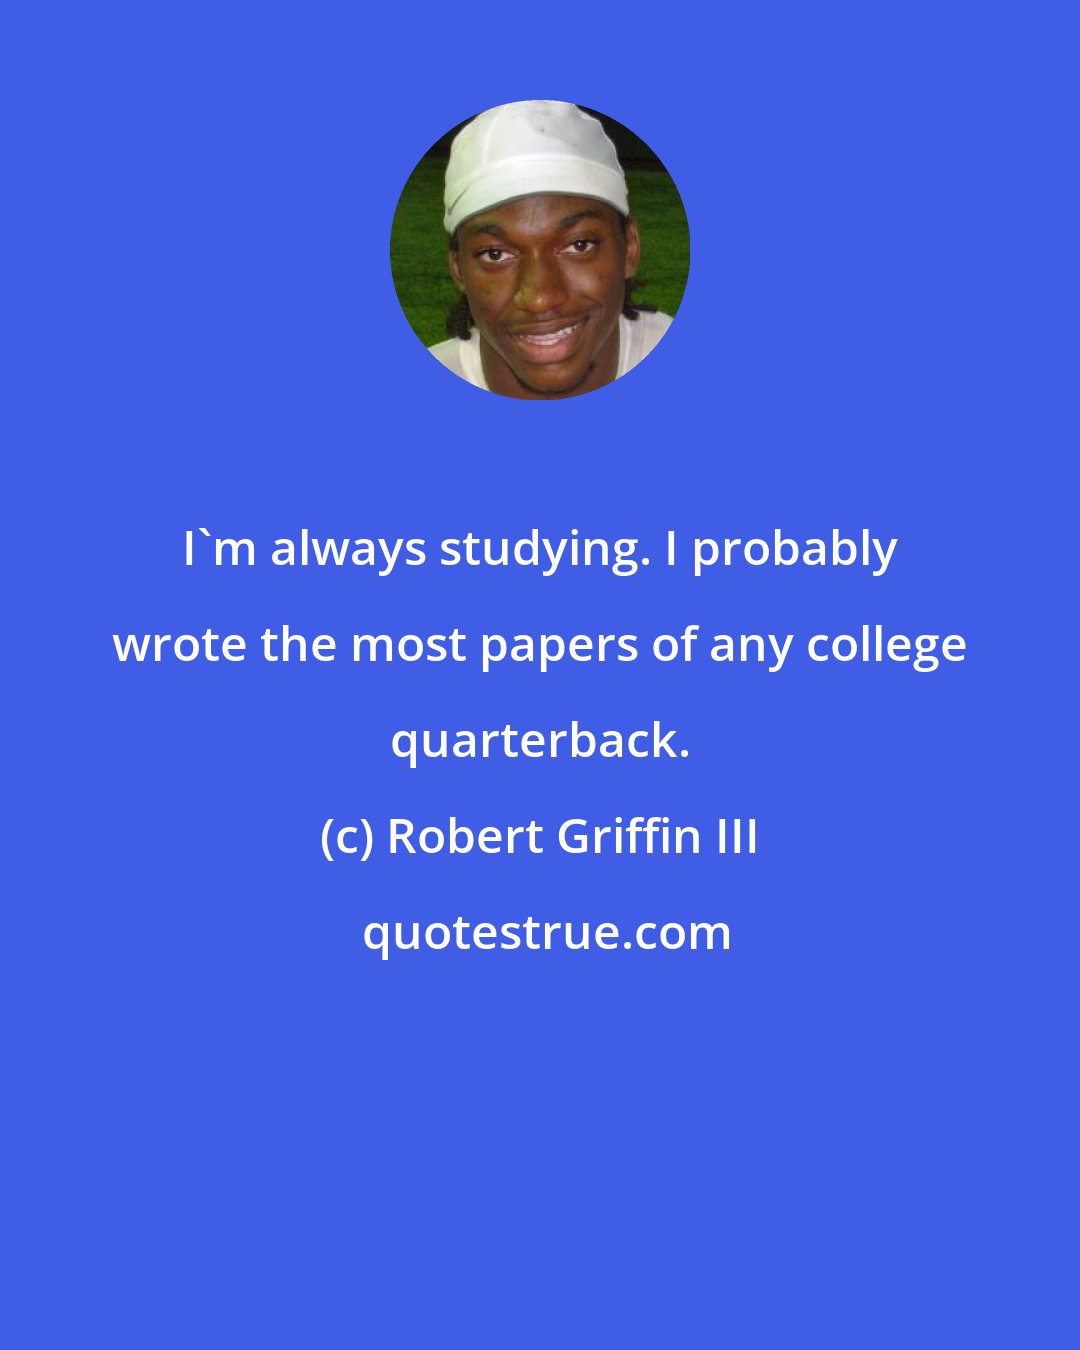 Robert Griffin III: I'm always studying. I probably wrote the most papers of any college quarterback.